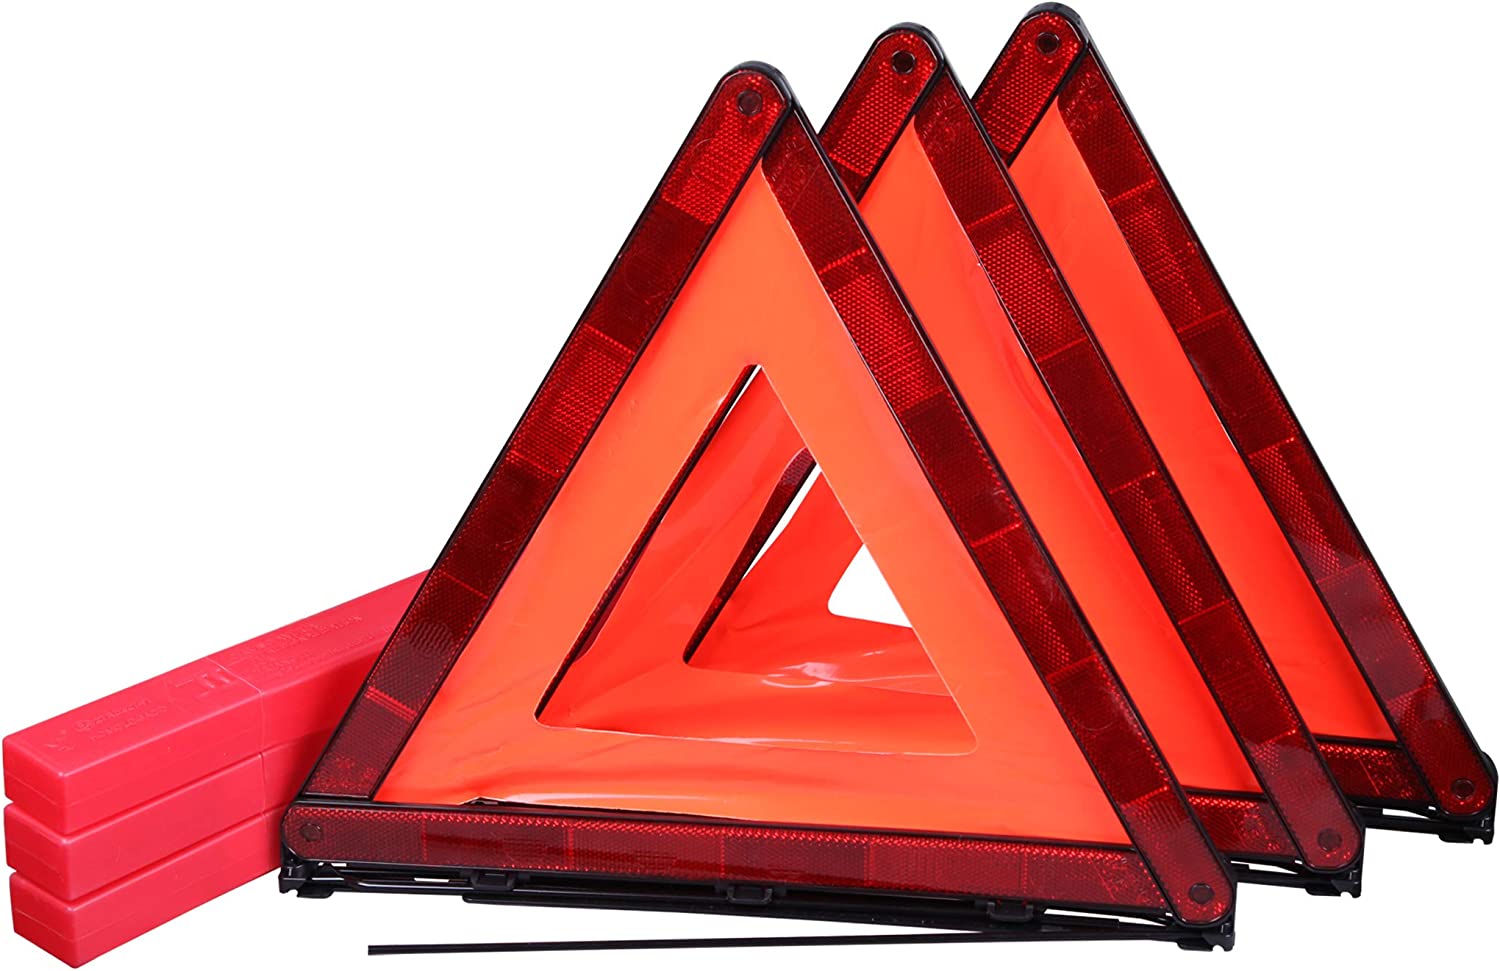 Amazon Prime Members: 3-Pack 17" Cartman Foldable Emergency Safety Warning Triangles w/ Storage Case $4 + Free Shipping w/ Prime or on $25+